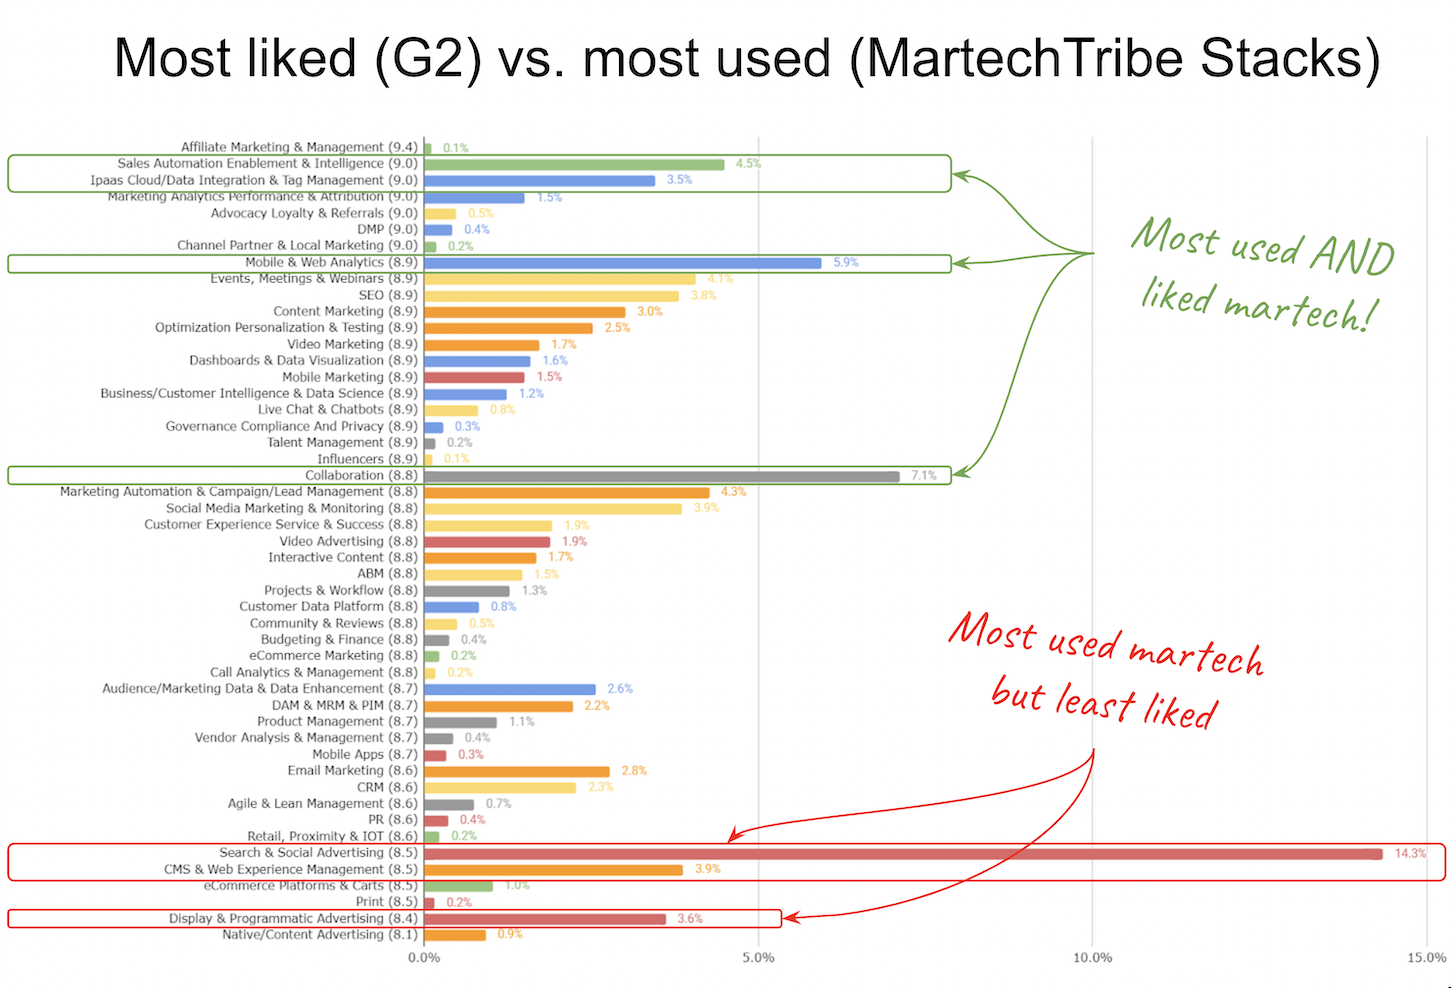 Martech Products: Ratings vs. Popularity in Martech Stacks